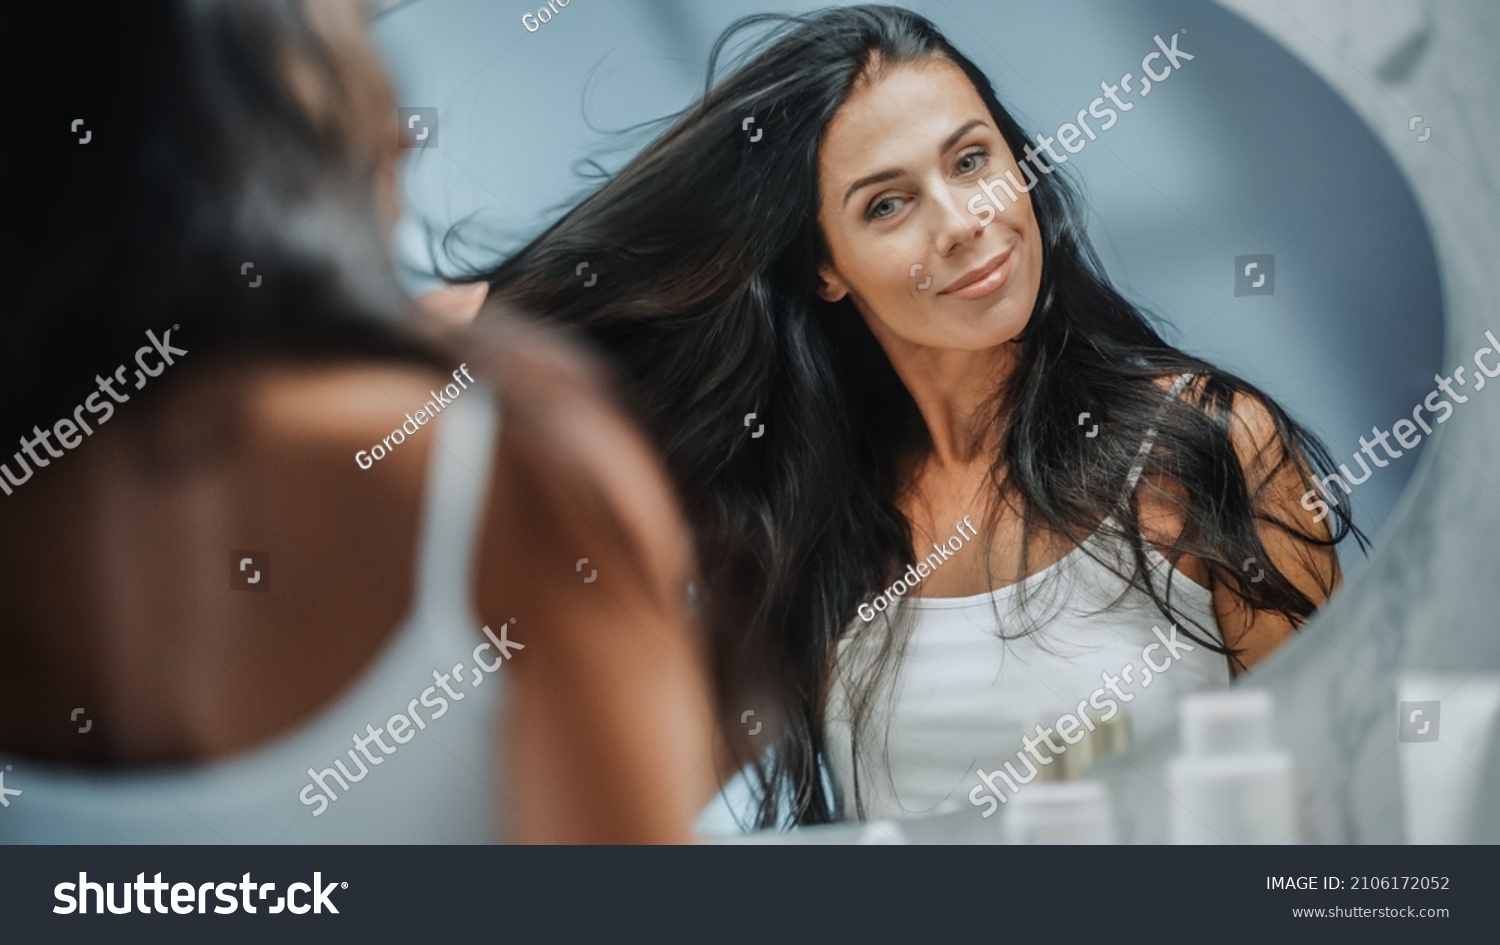 Beautiful Early Middle Aged Woman Looks into Bathroom Mirror Touches Her Lush Black Hair, Admires Her Looks. Concept for Happiness, Wellbeing, Natural Beauty, Organic Skin Care Products #2106172052